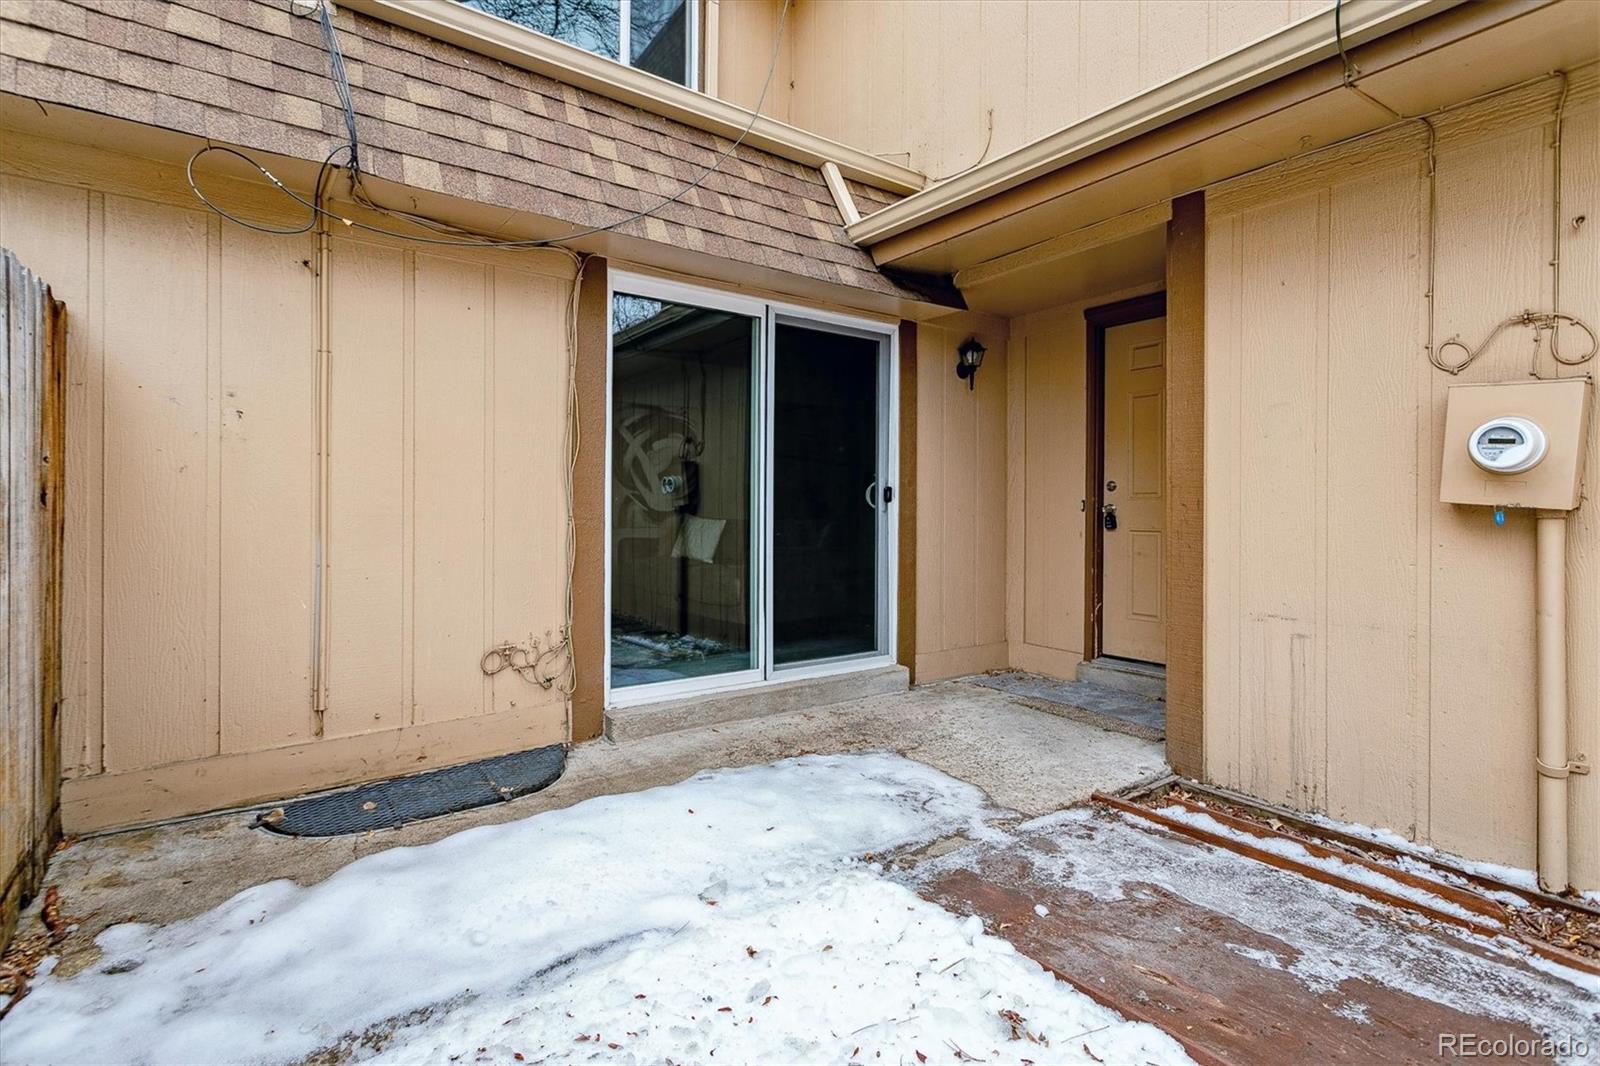 Report Image for 1349 S Chambers Circle,Aurora, Colorado